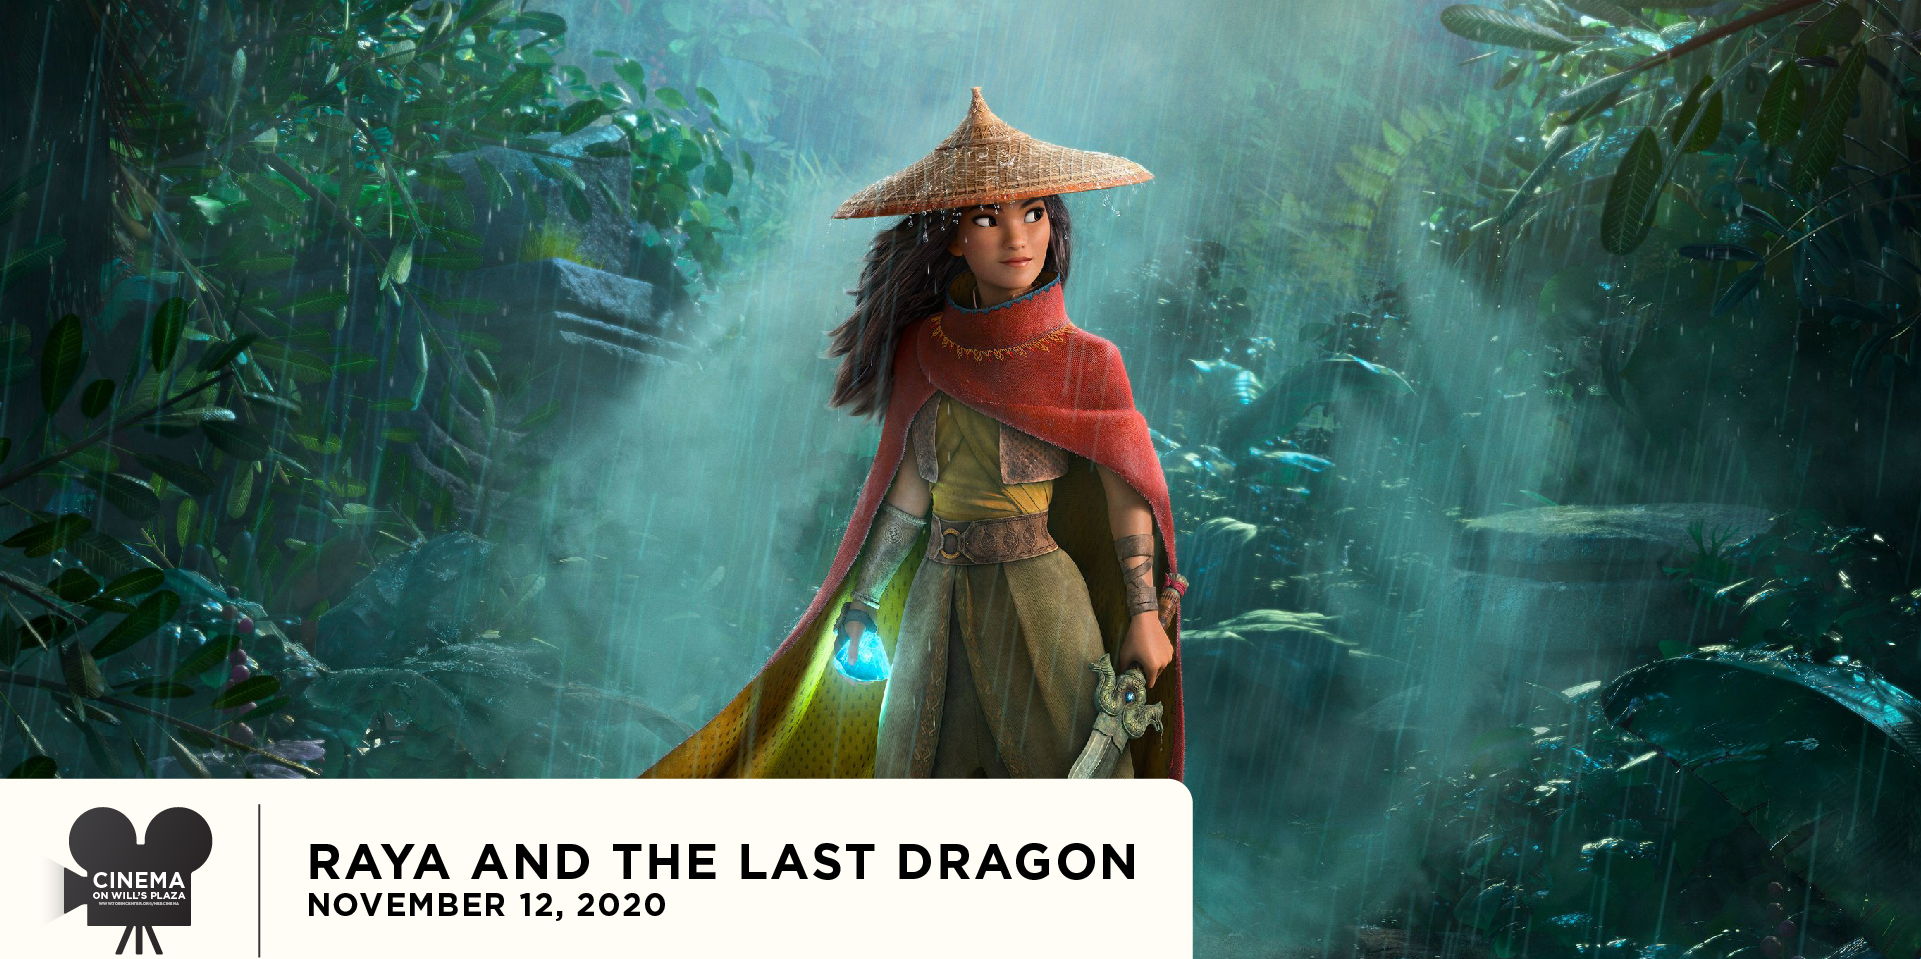 Cinema on Will's Plaza | Raya and the Last Dragon promotional image